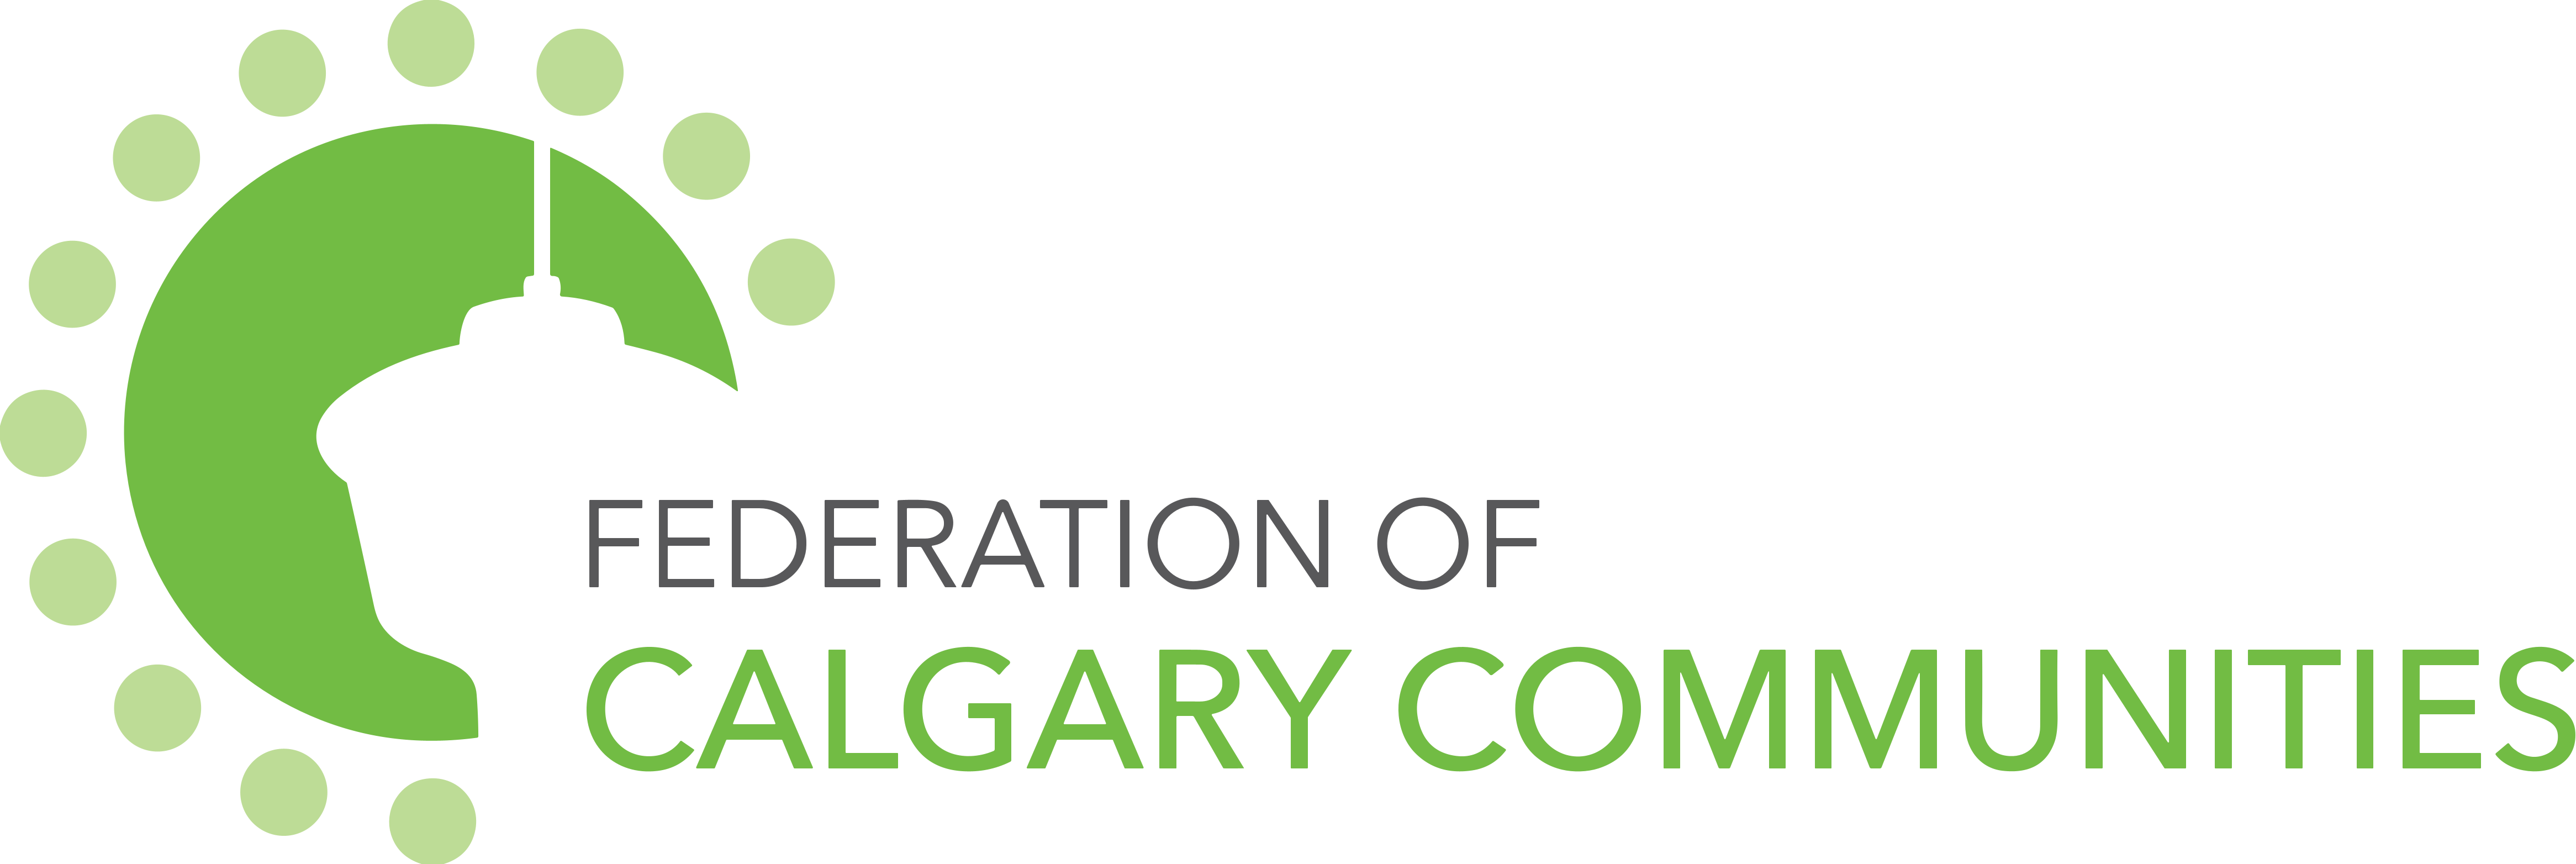 Logo for Federation of Calgary Communities on a transparent background